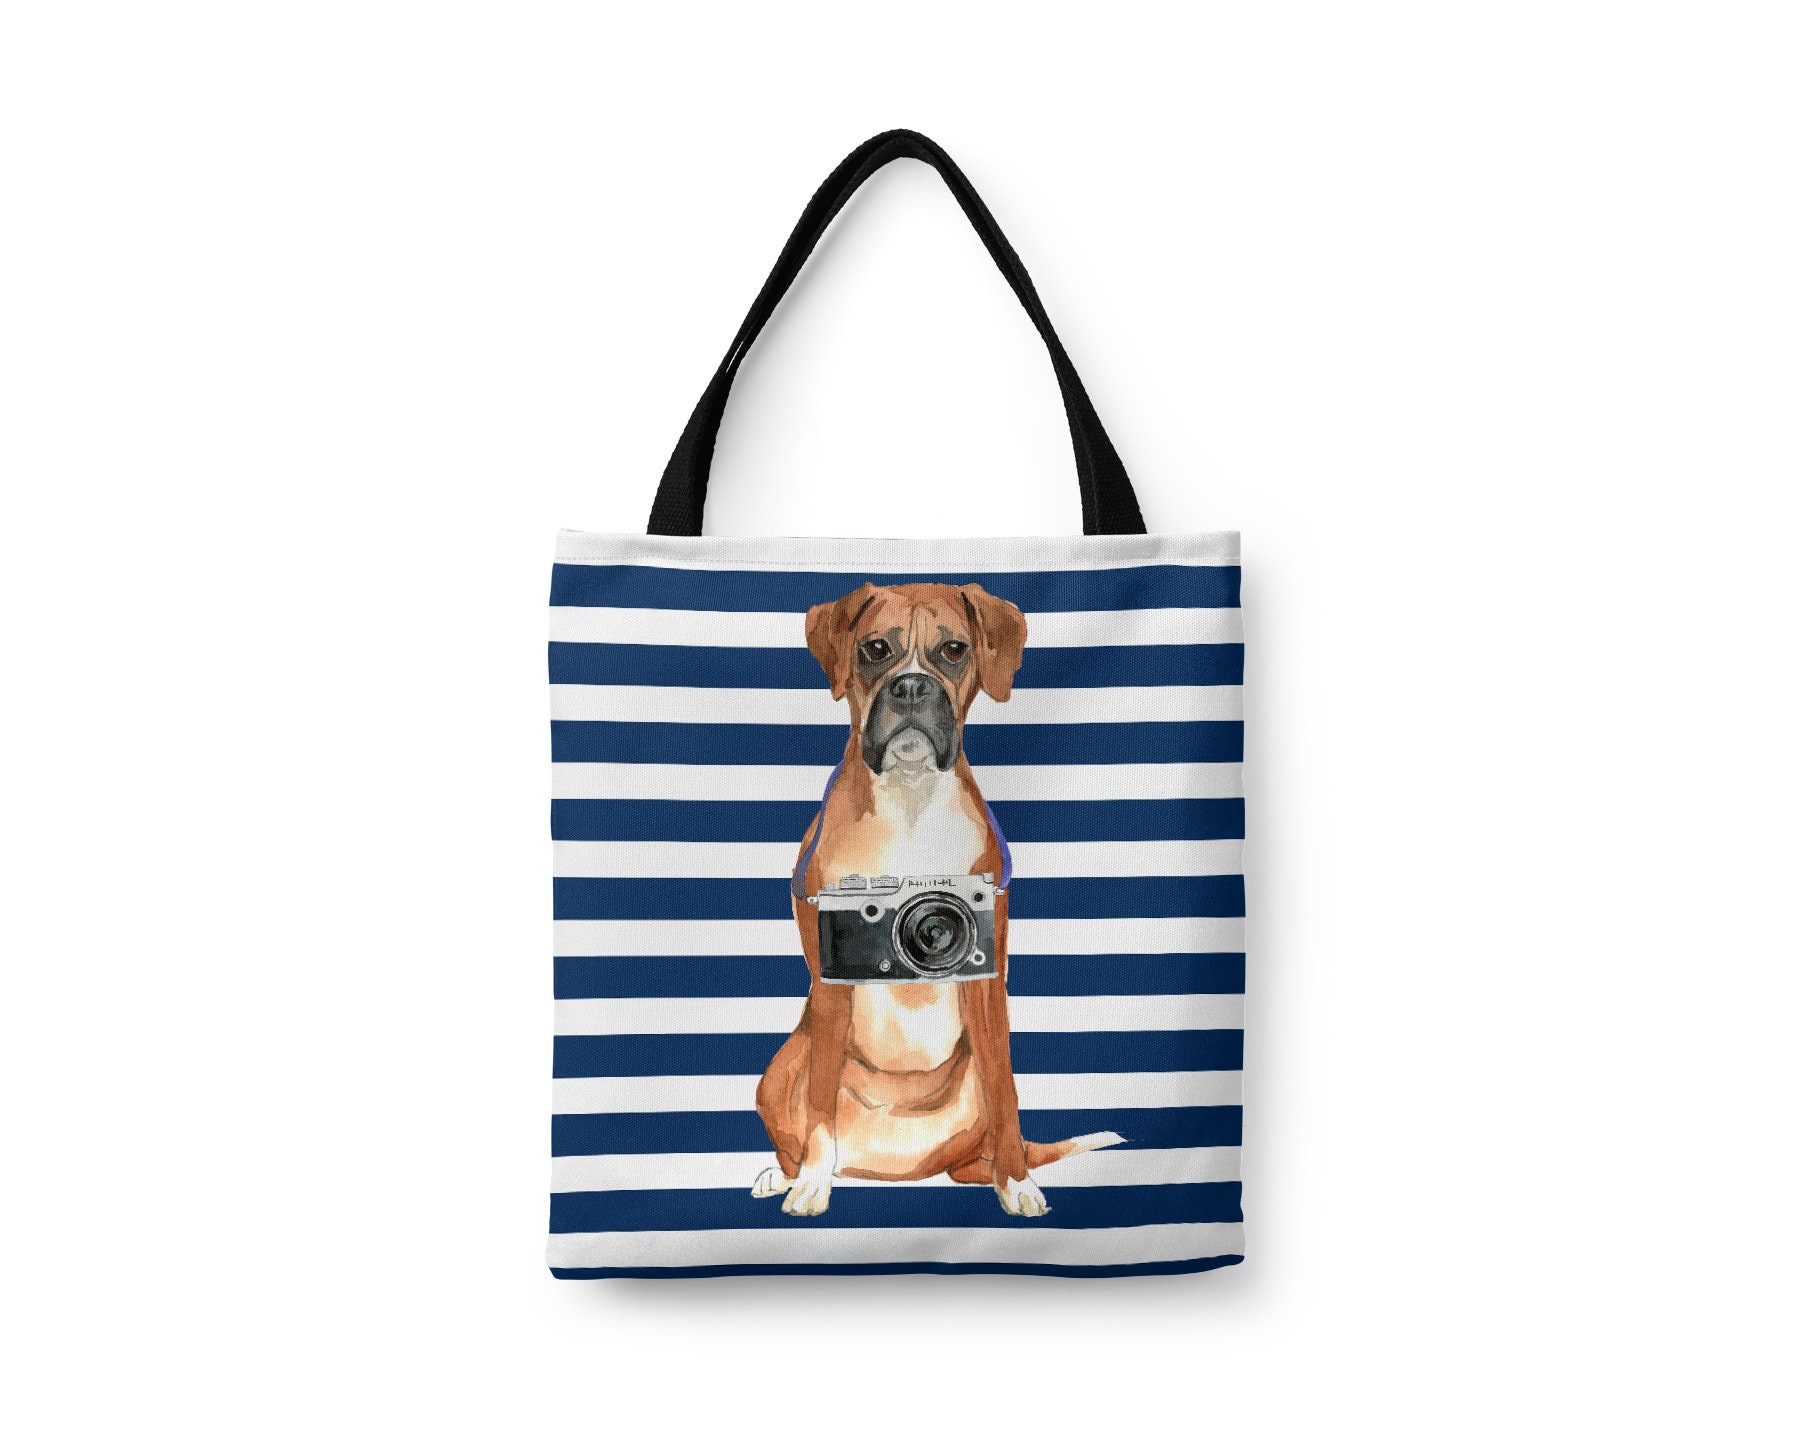 Boxer Dog Tote Bag - Illustrated Dogs & 6 Travel Inspired Styles. All Purpose For Work, Shopping, Life. German Boxer, Deutscher Bag